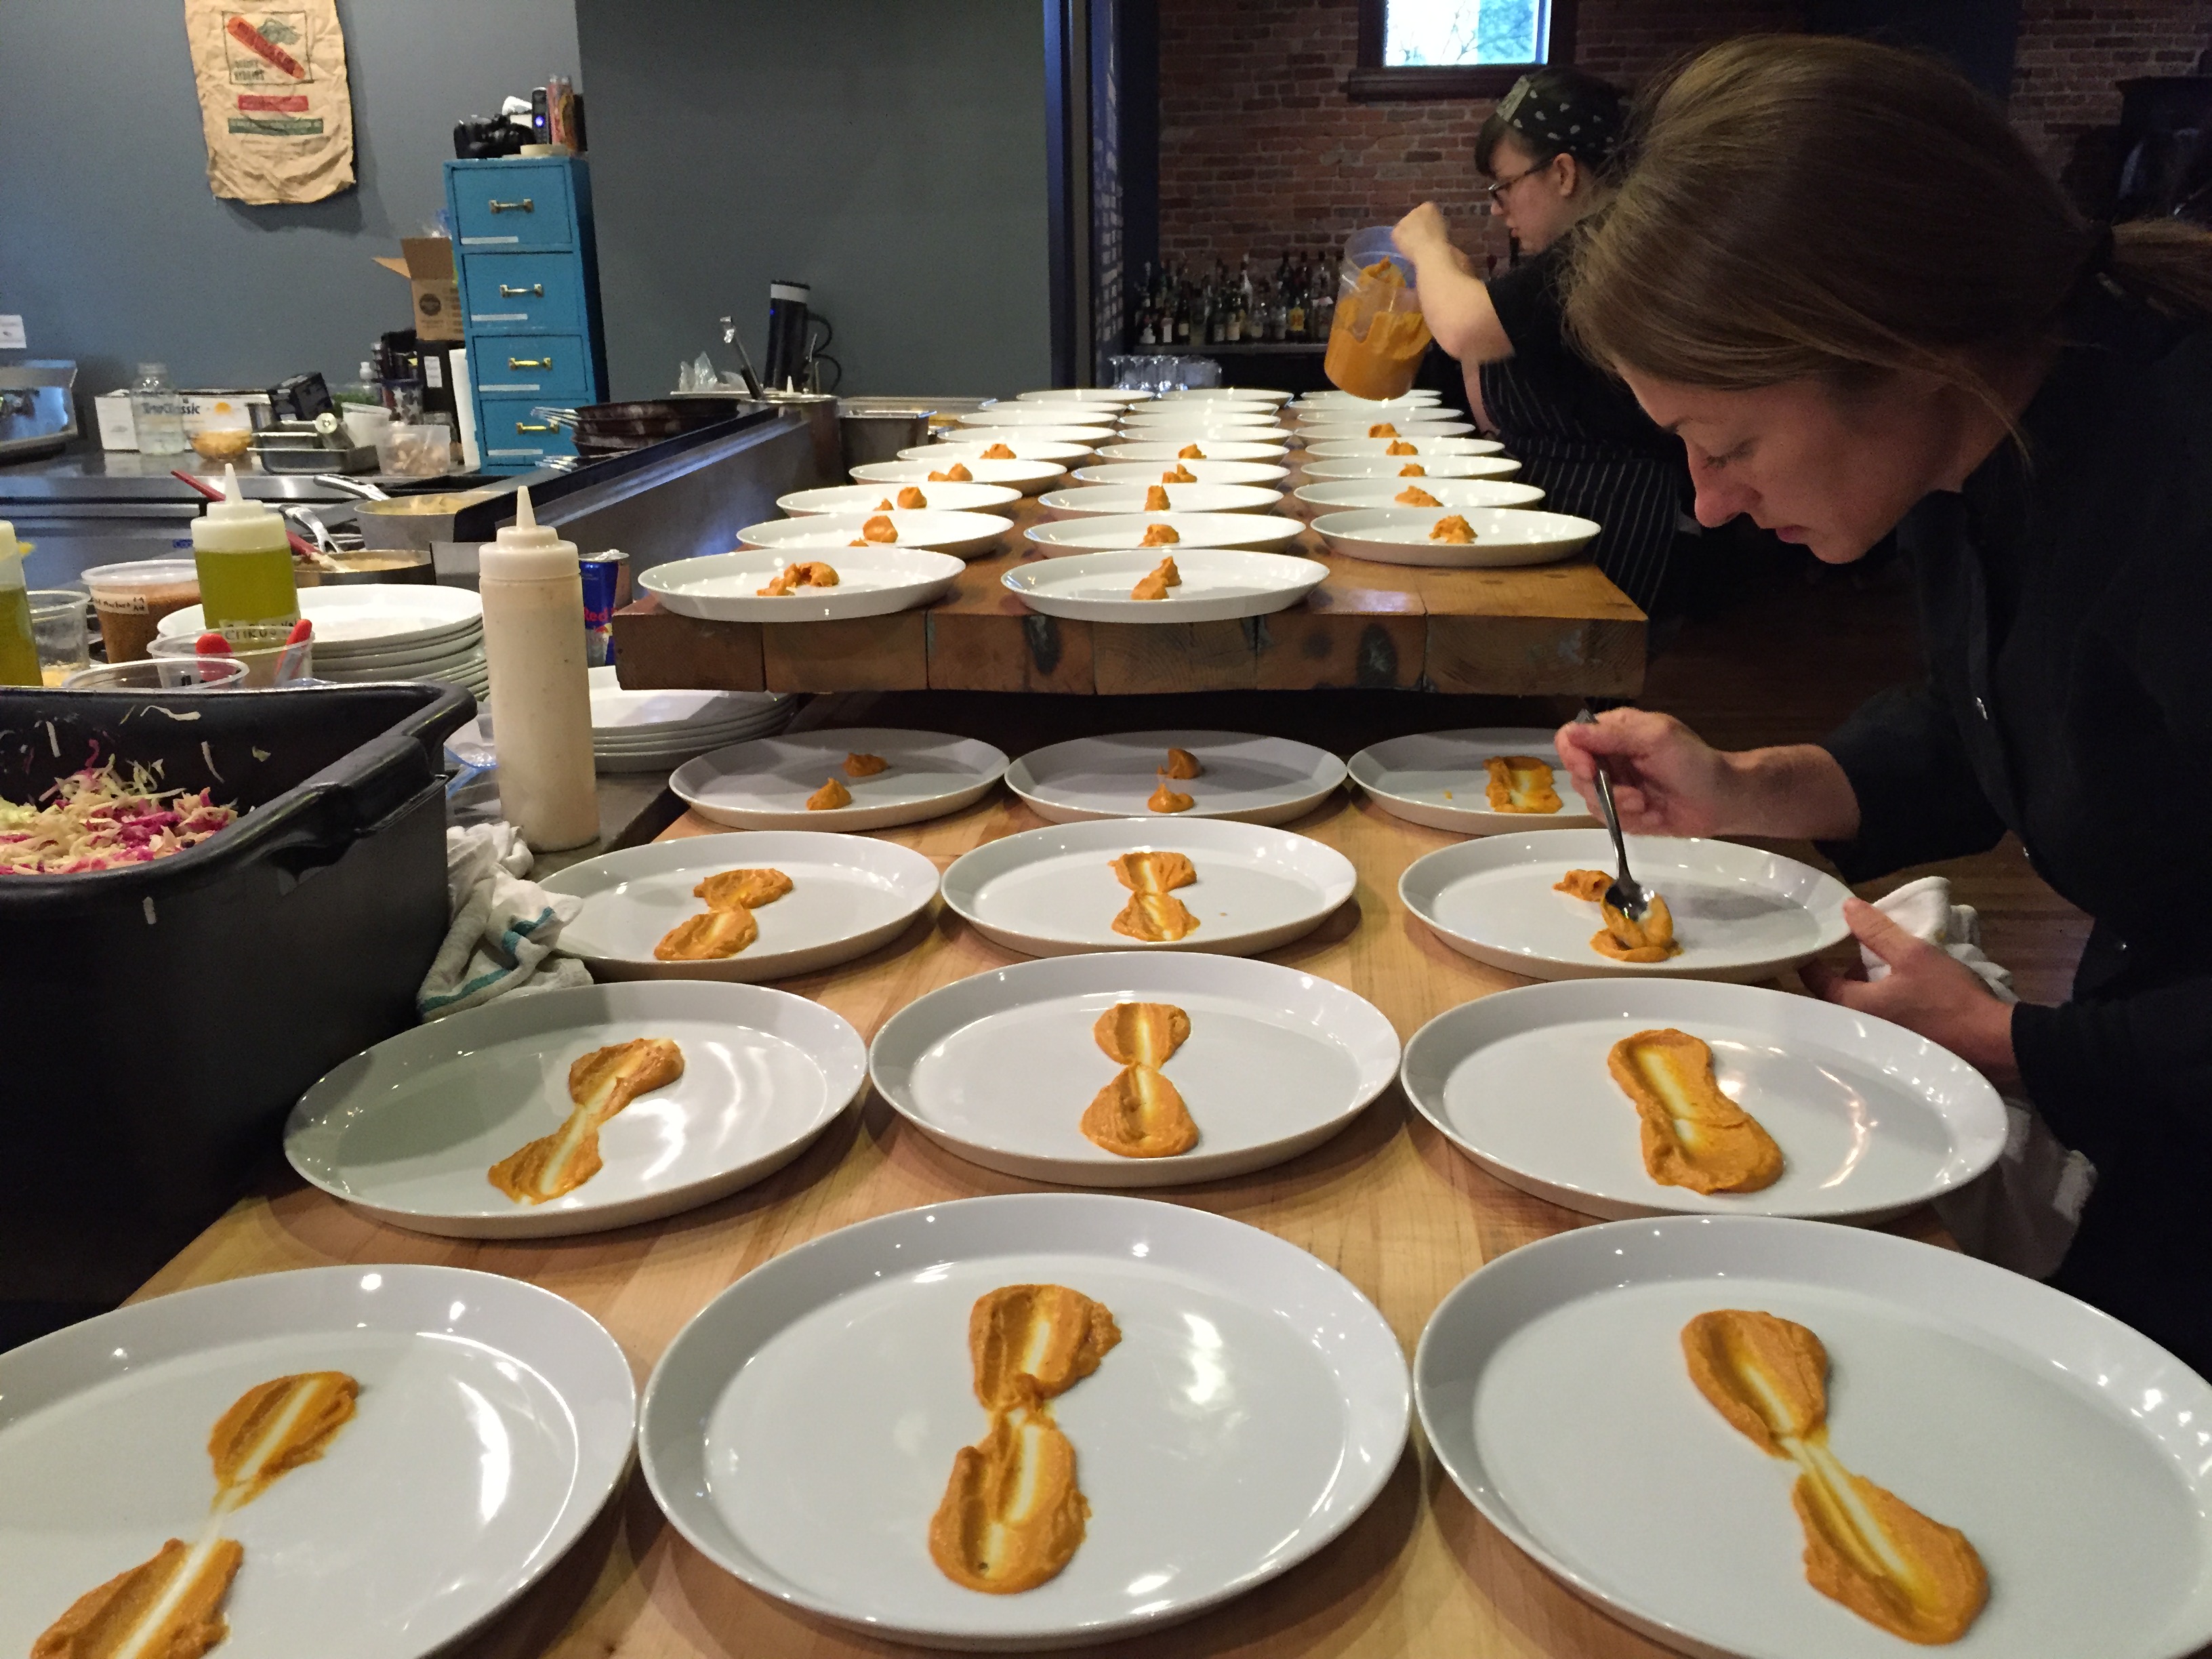 Dozens of plates smeared with sauce in preparation for cooking class